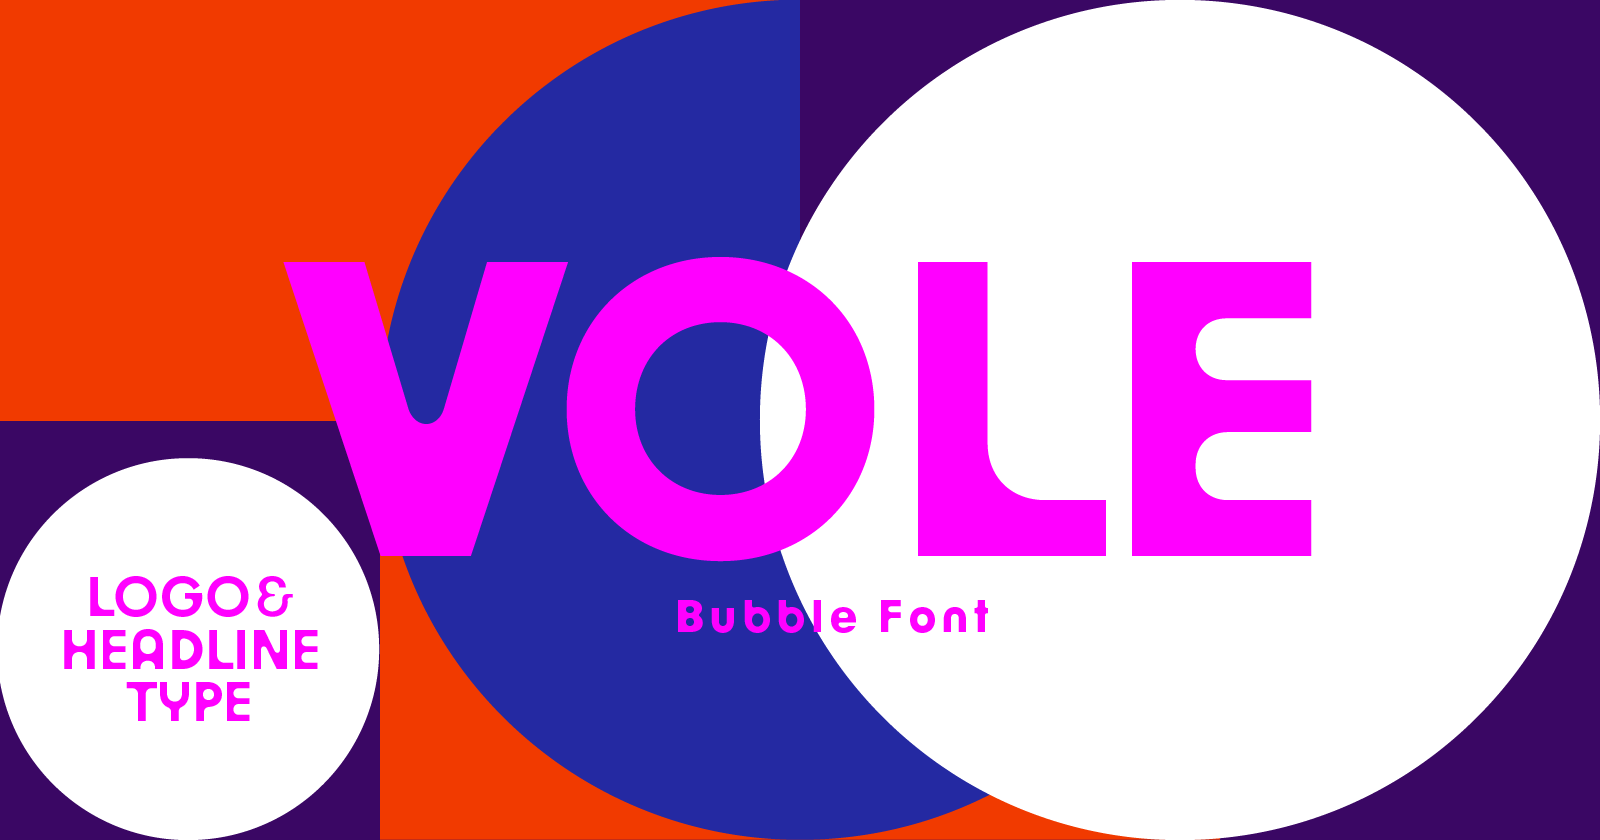 Vole Semibold font weight similar Cocomelon